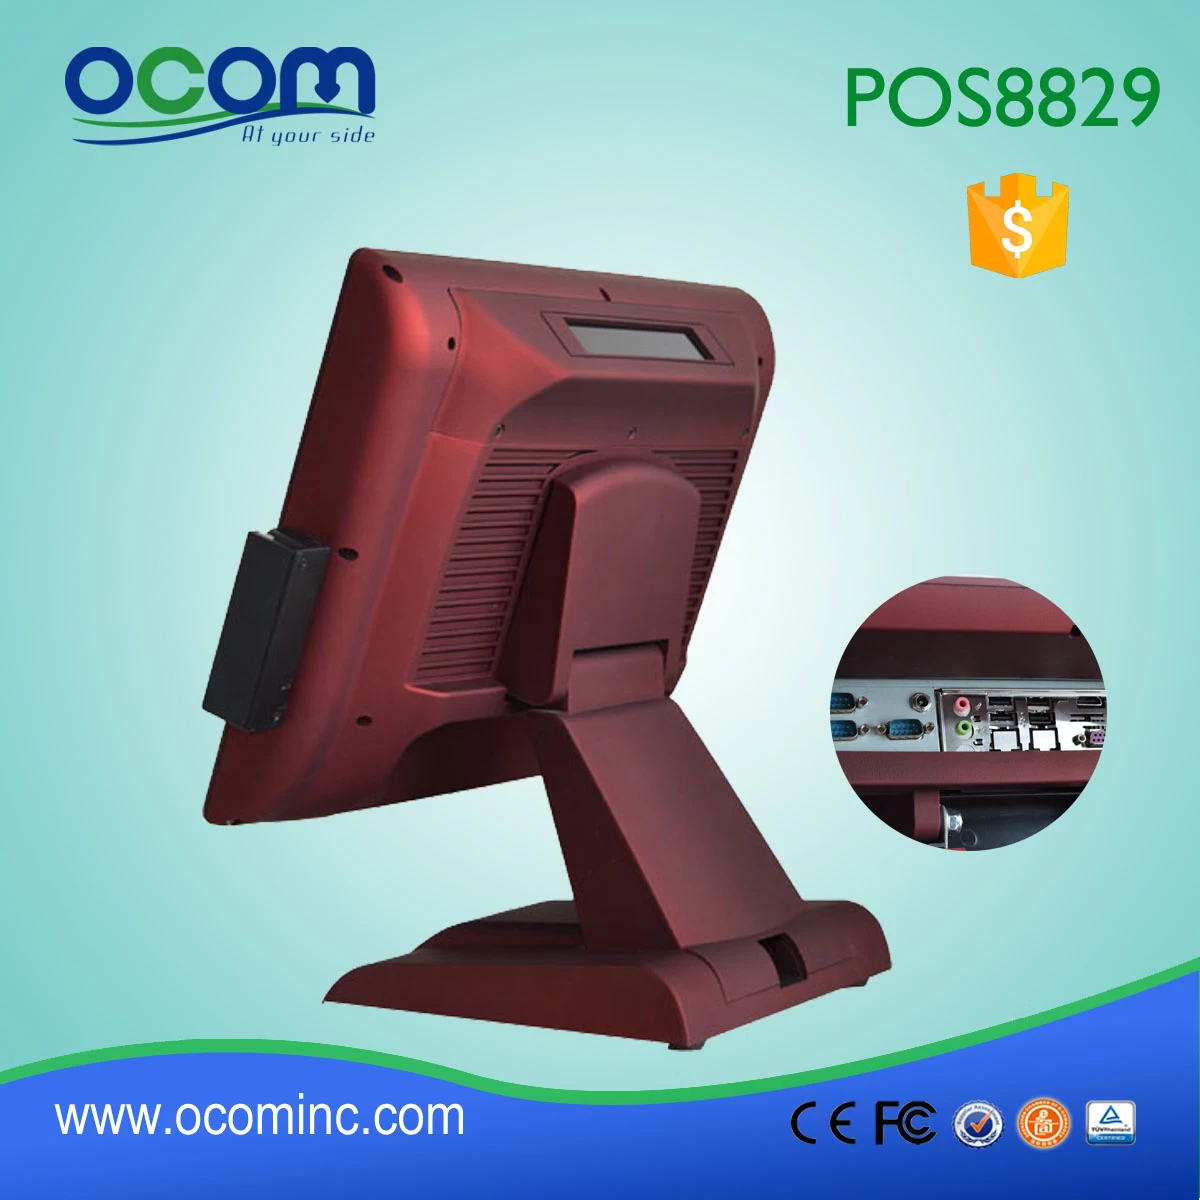 2015 All in one touch pos terminal POS8829